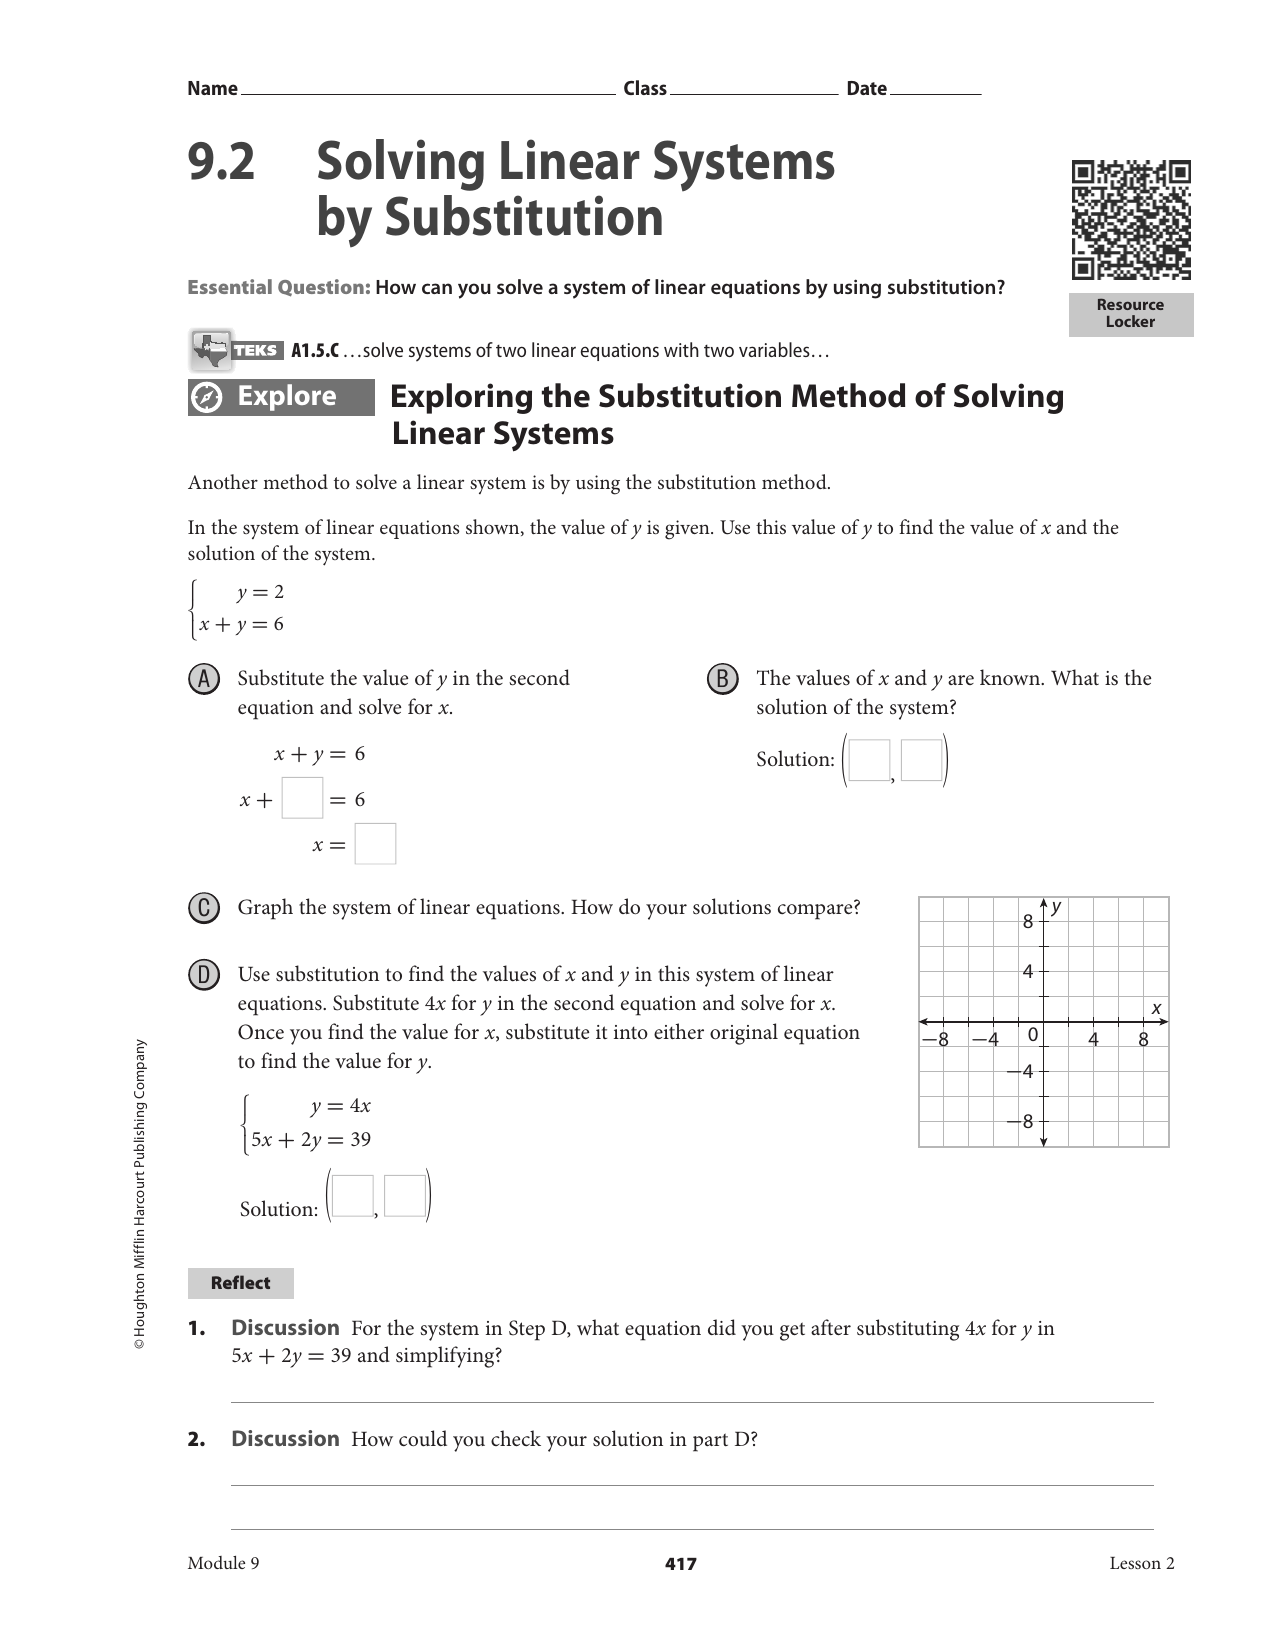 200 . 20 Solving Linear Systems by Substitution For Substitution Method Worksheet Answers